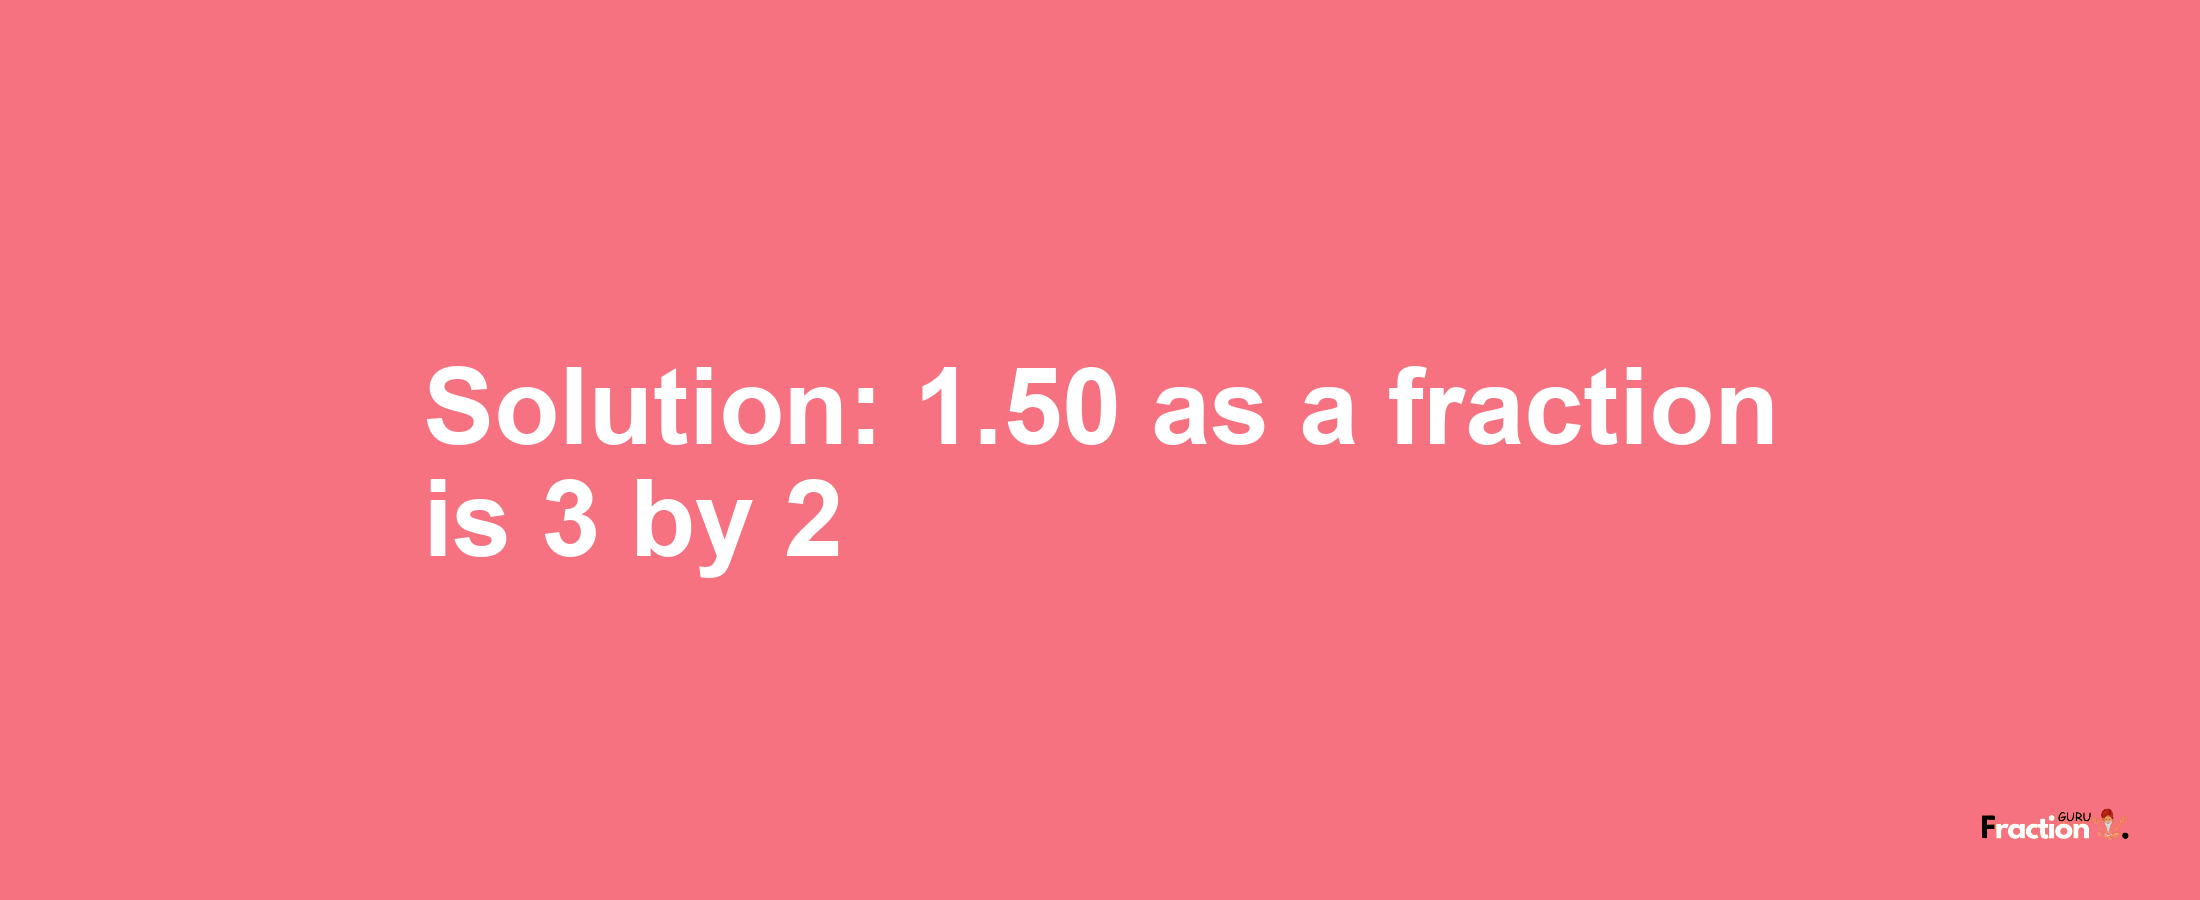 Solution:1.50 as a fraction is 3/2